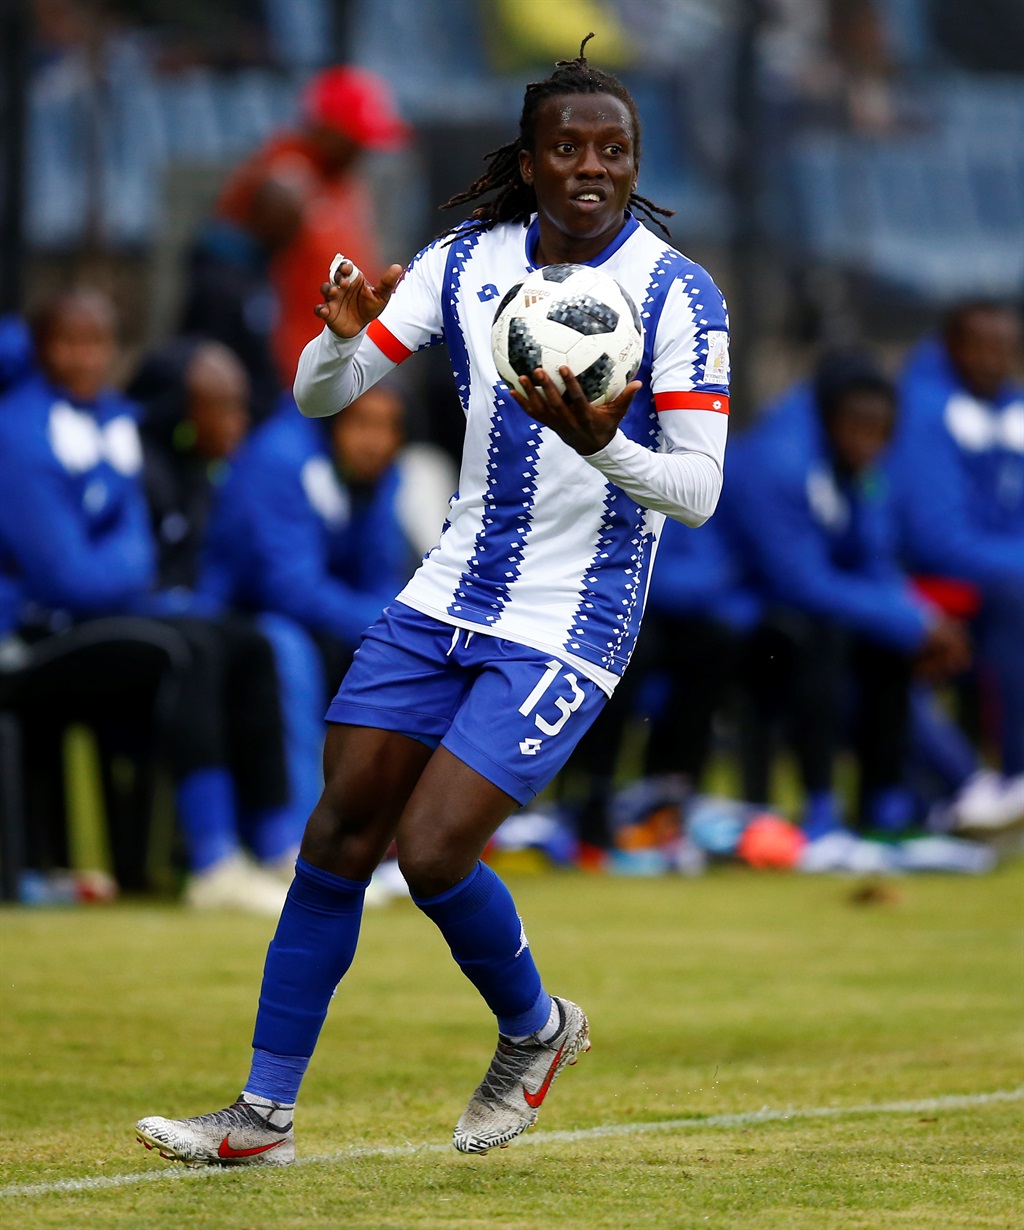 PIETERMARITZBURG, SOUTH AFRICA - MAY 04:  during the Absa Premiership match between Maritzburg United and SuperSport United at Harry Gwala Stadium on May 04, 2019 in Pietermaritzburg, South Africa. (Photo by Steve Haag/Gallo Images)